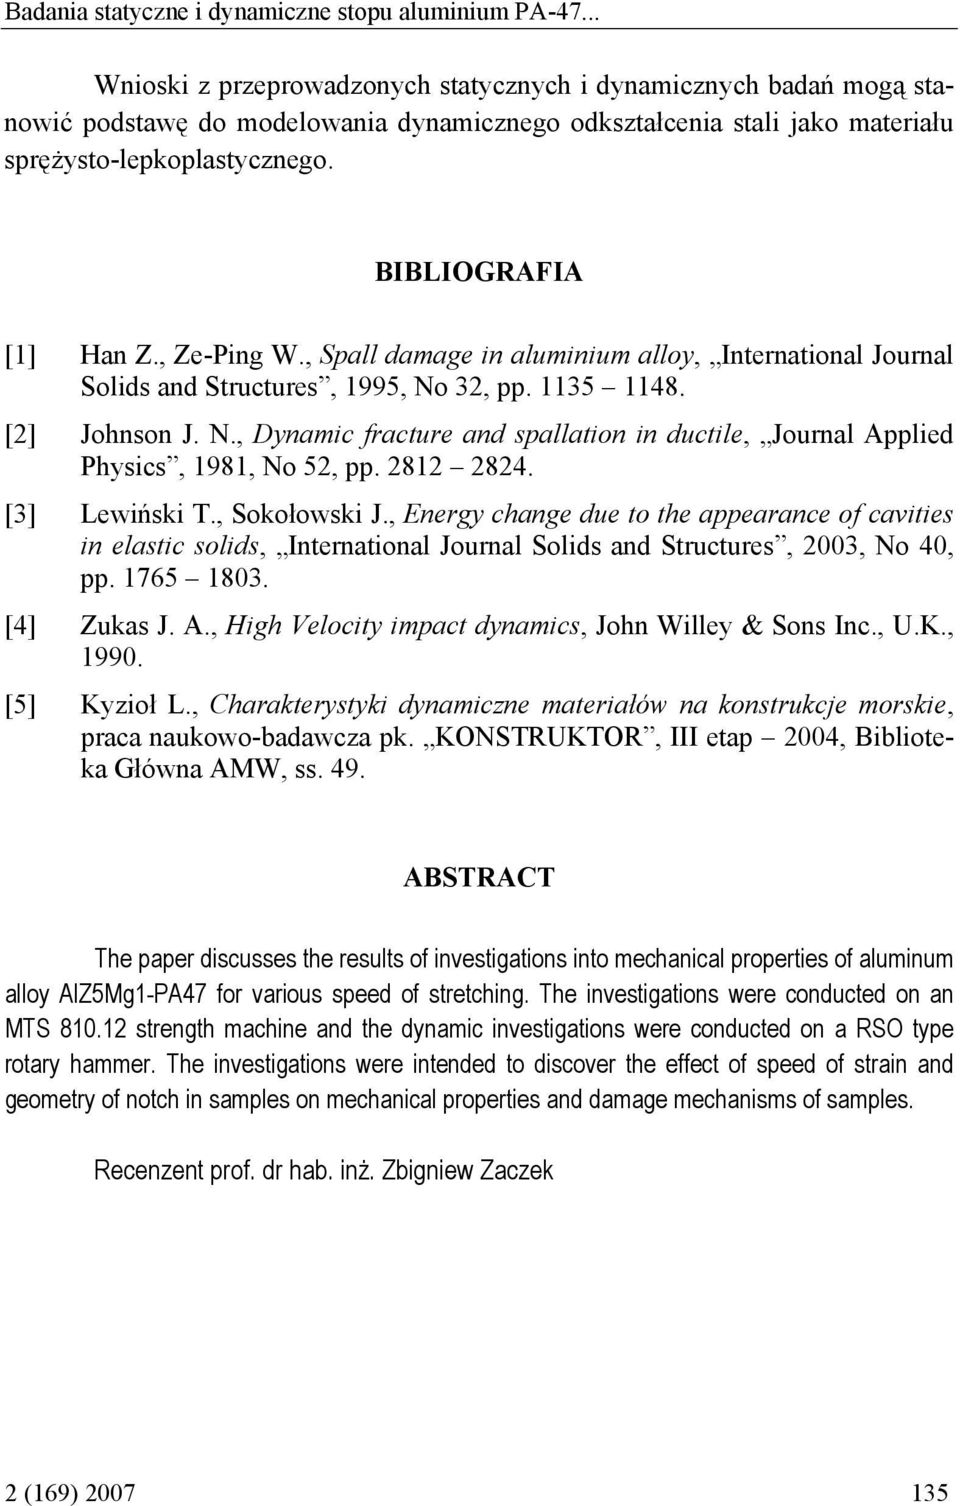 BIBLIOGRAFIA [1] Han Z., Ze-Ping W., Spall damage in aluminium alloy, International Journal Solids and Structures, 1995, No